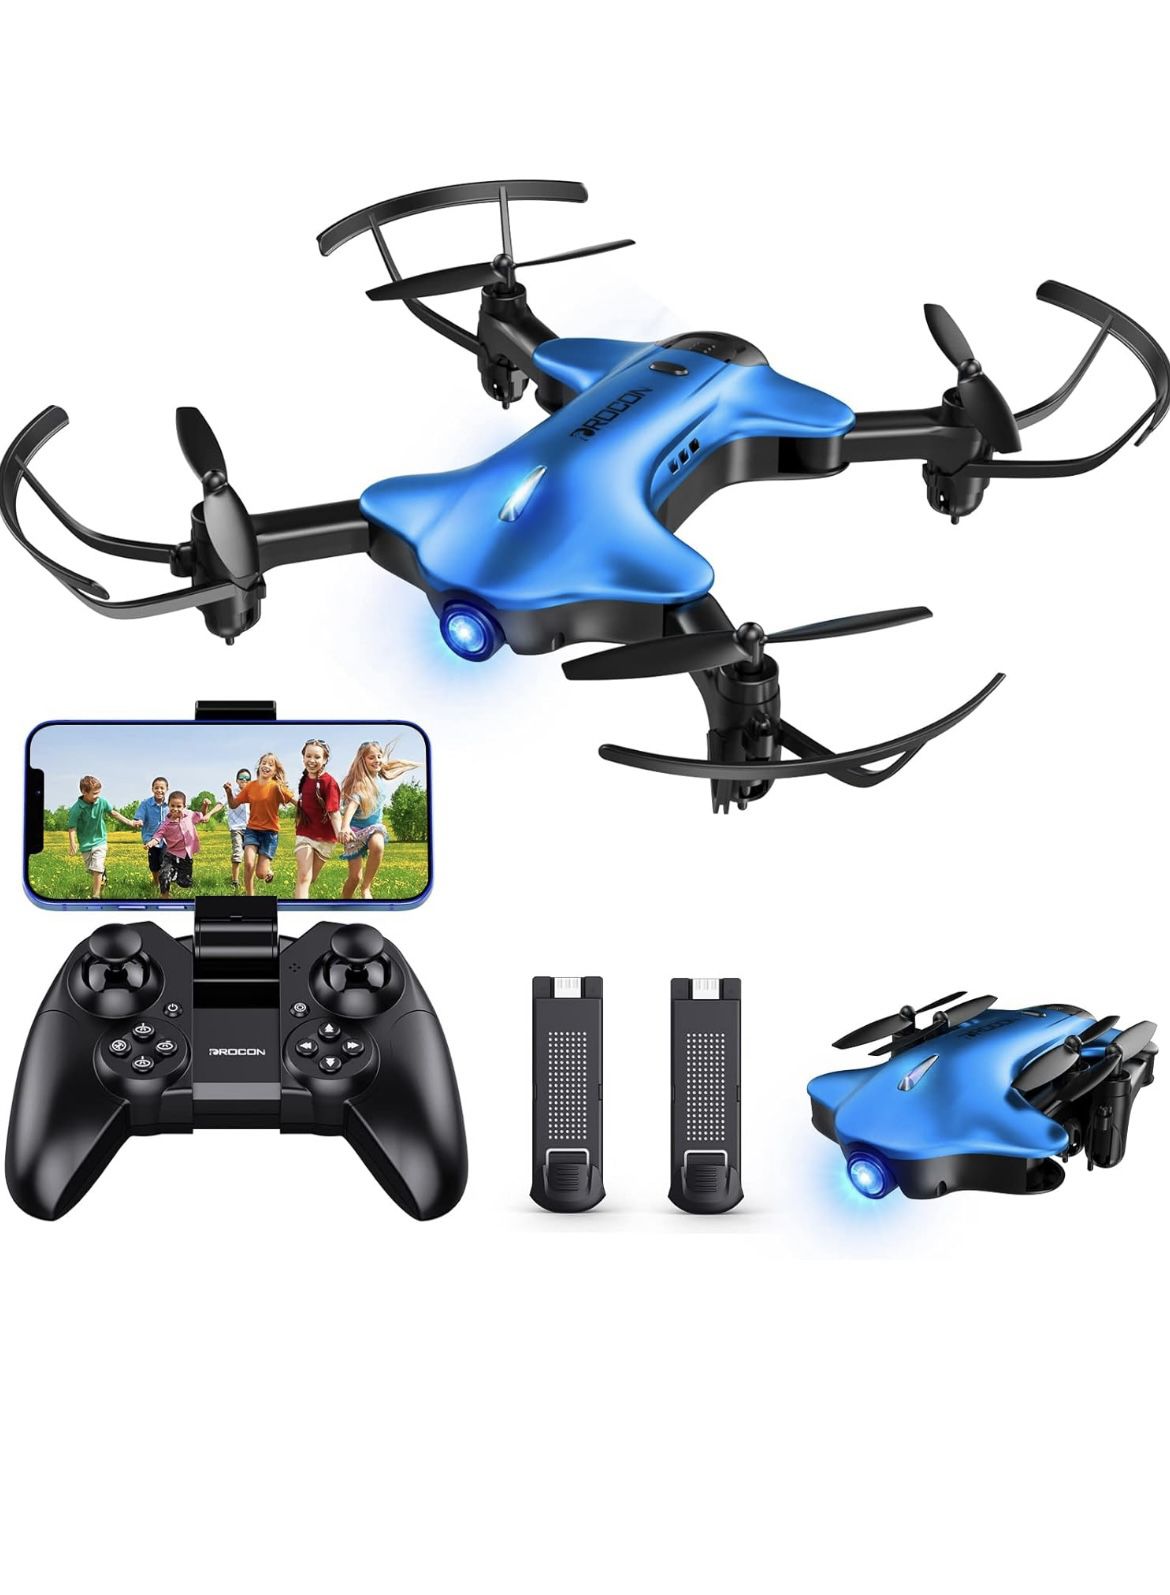 Brand New Drone with Camera, DROCON Spacekey 1080P Remote Control Drone for Kids Beginners, FPV Drone App Control, Gravity Control, One-key Return, 2 